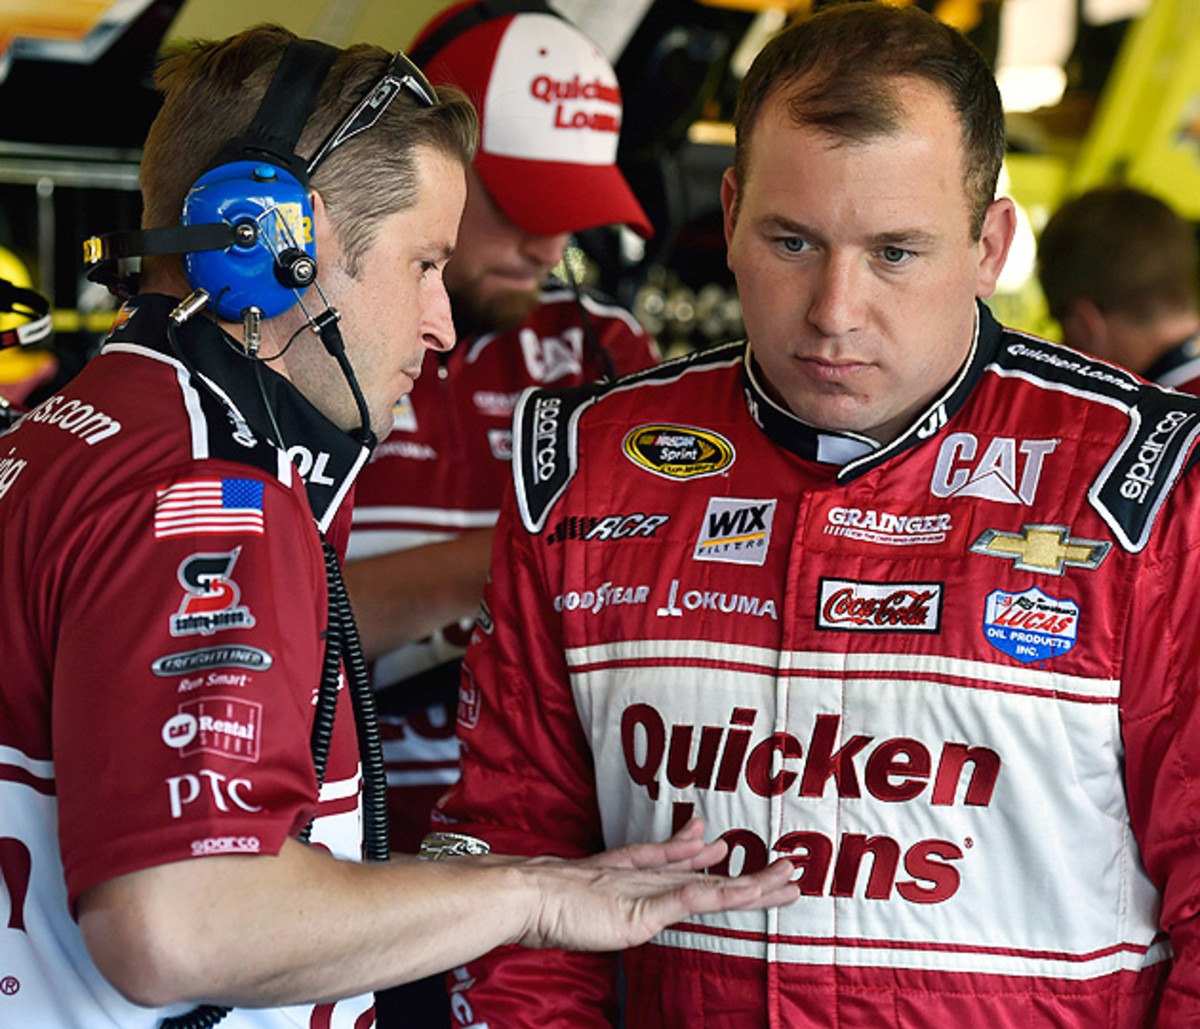 Ryan Newman docked 75 points: NASCAR leavies heavy penalty on driver ...